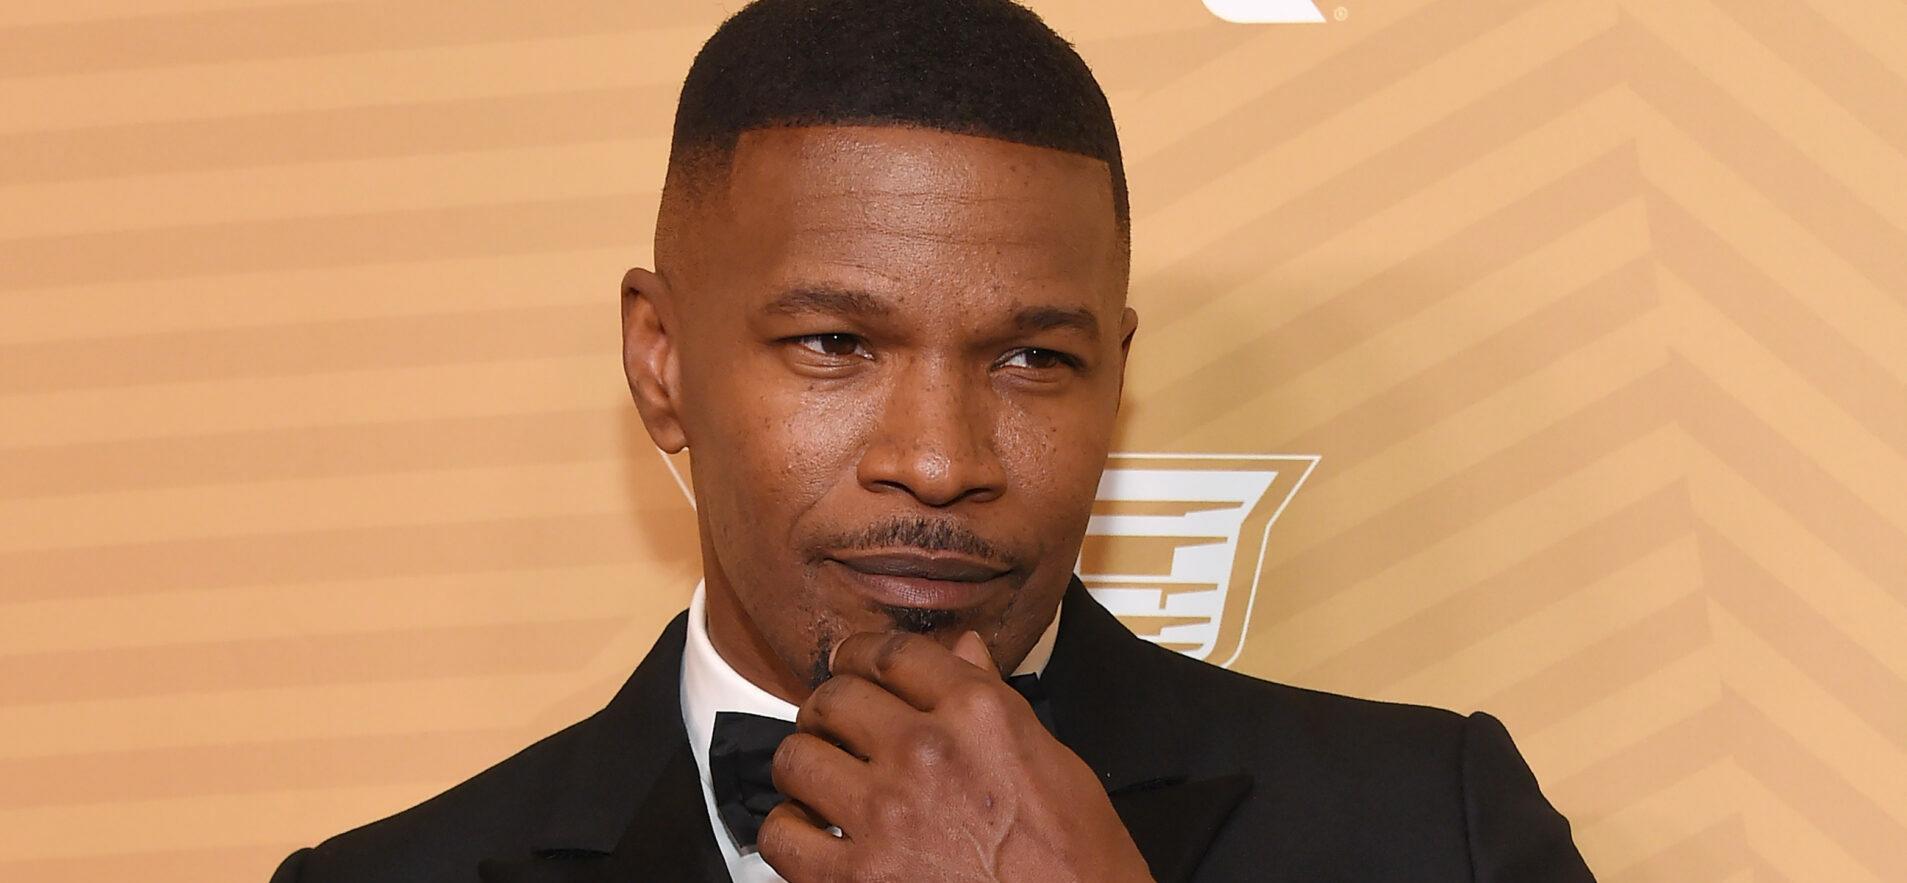 Jamie Foxx Looks Dapper In New Photo Shared After Hospitalization: ‘Big Things Coming Soon’